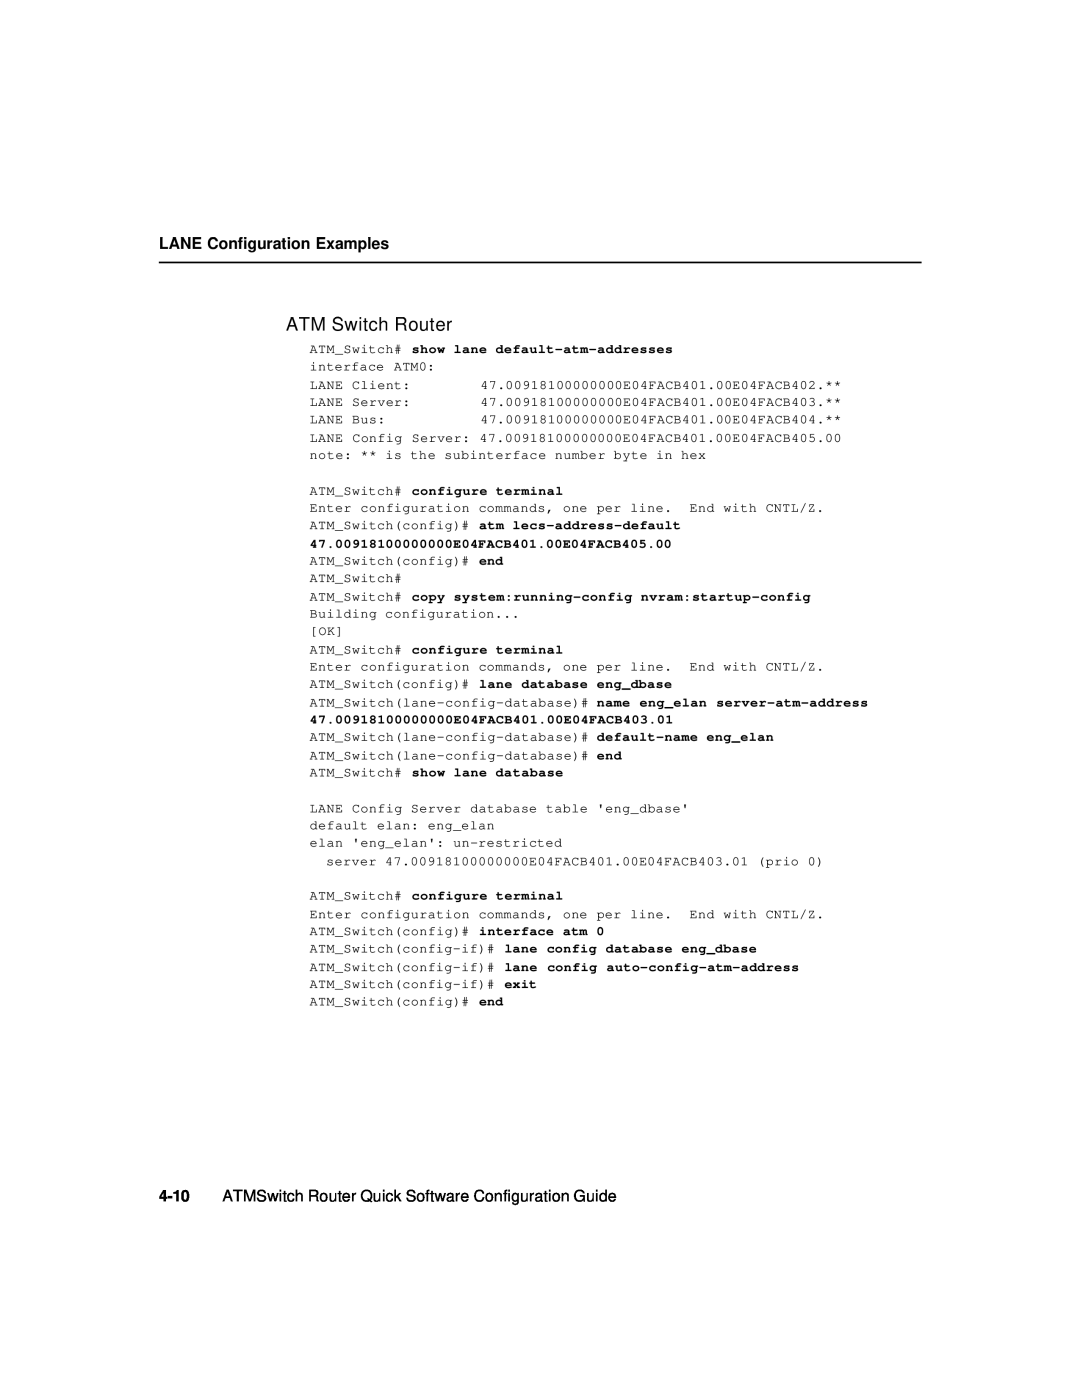 Cisco Systems 78-6897-01 manual ATM Switch Router, LANE Configuration Examples, ATMSwitch# configure terminal 